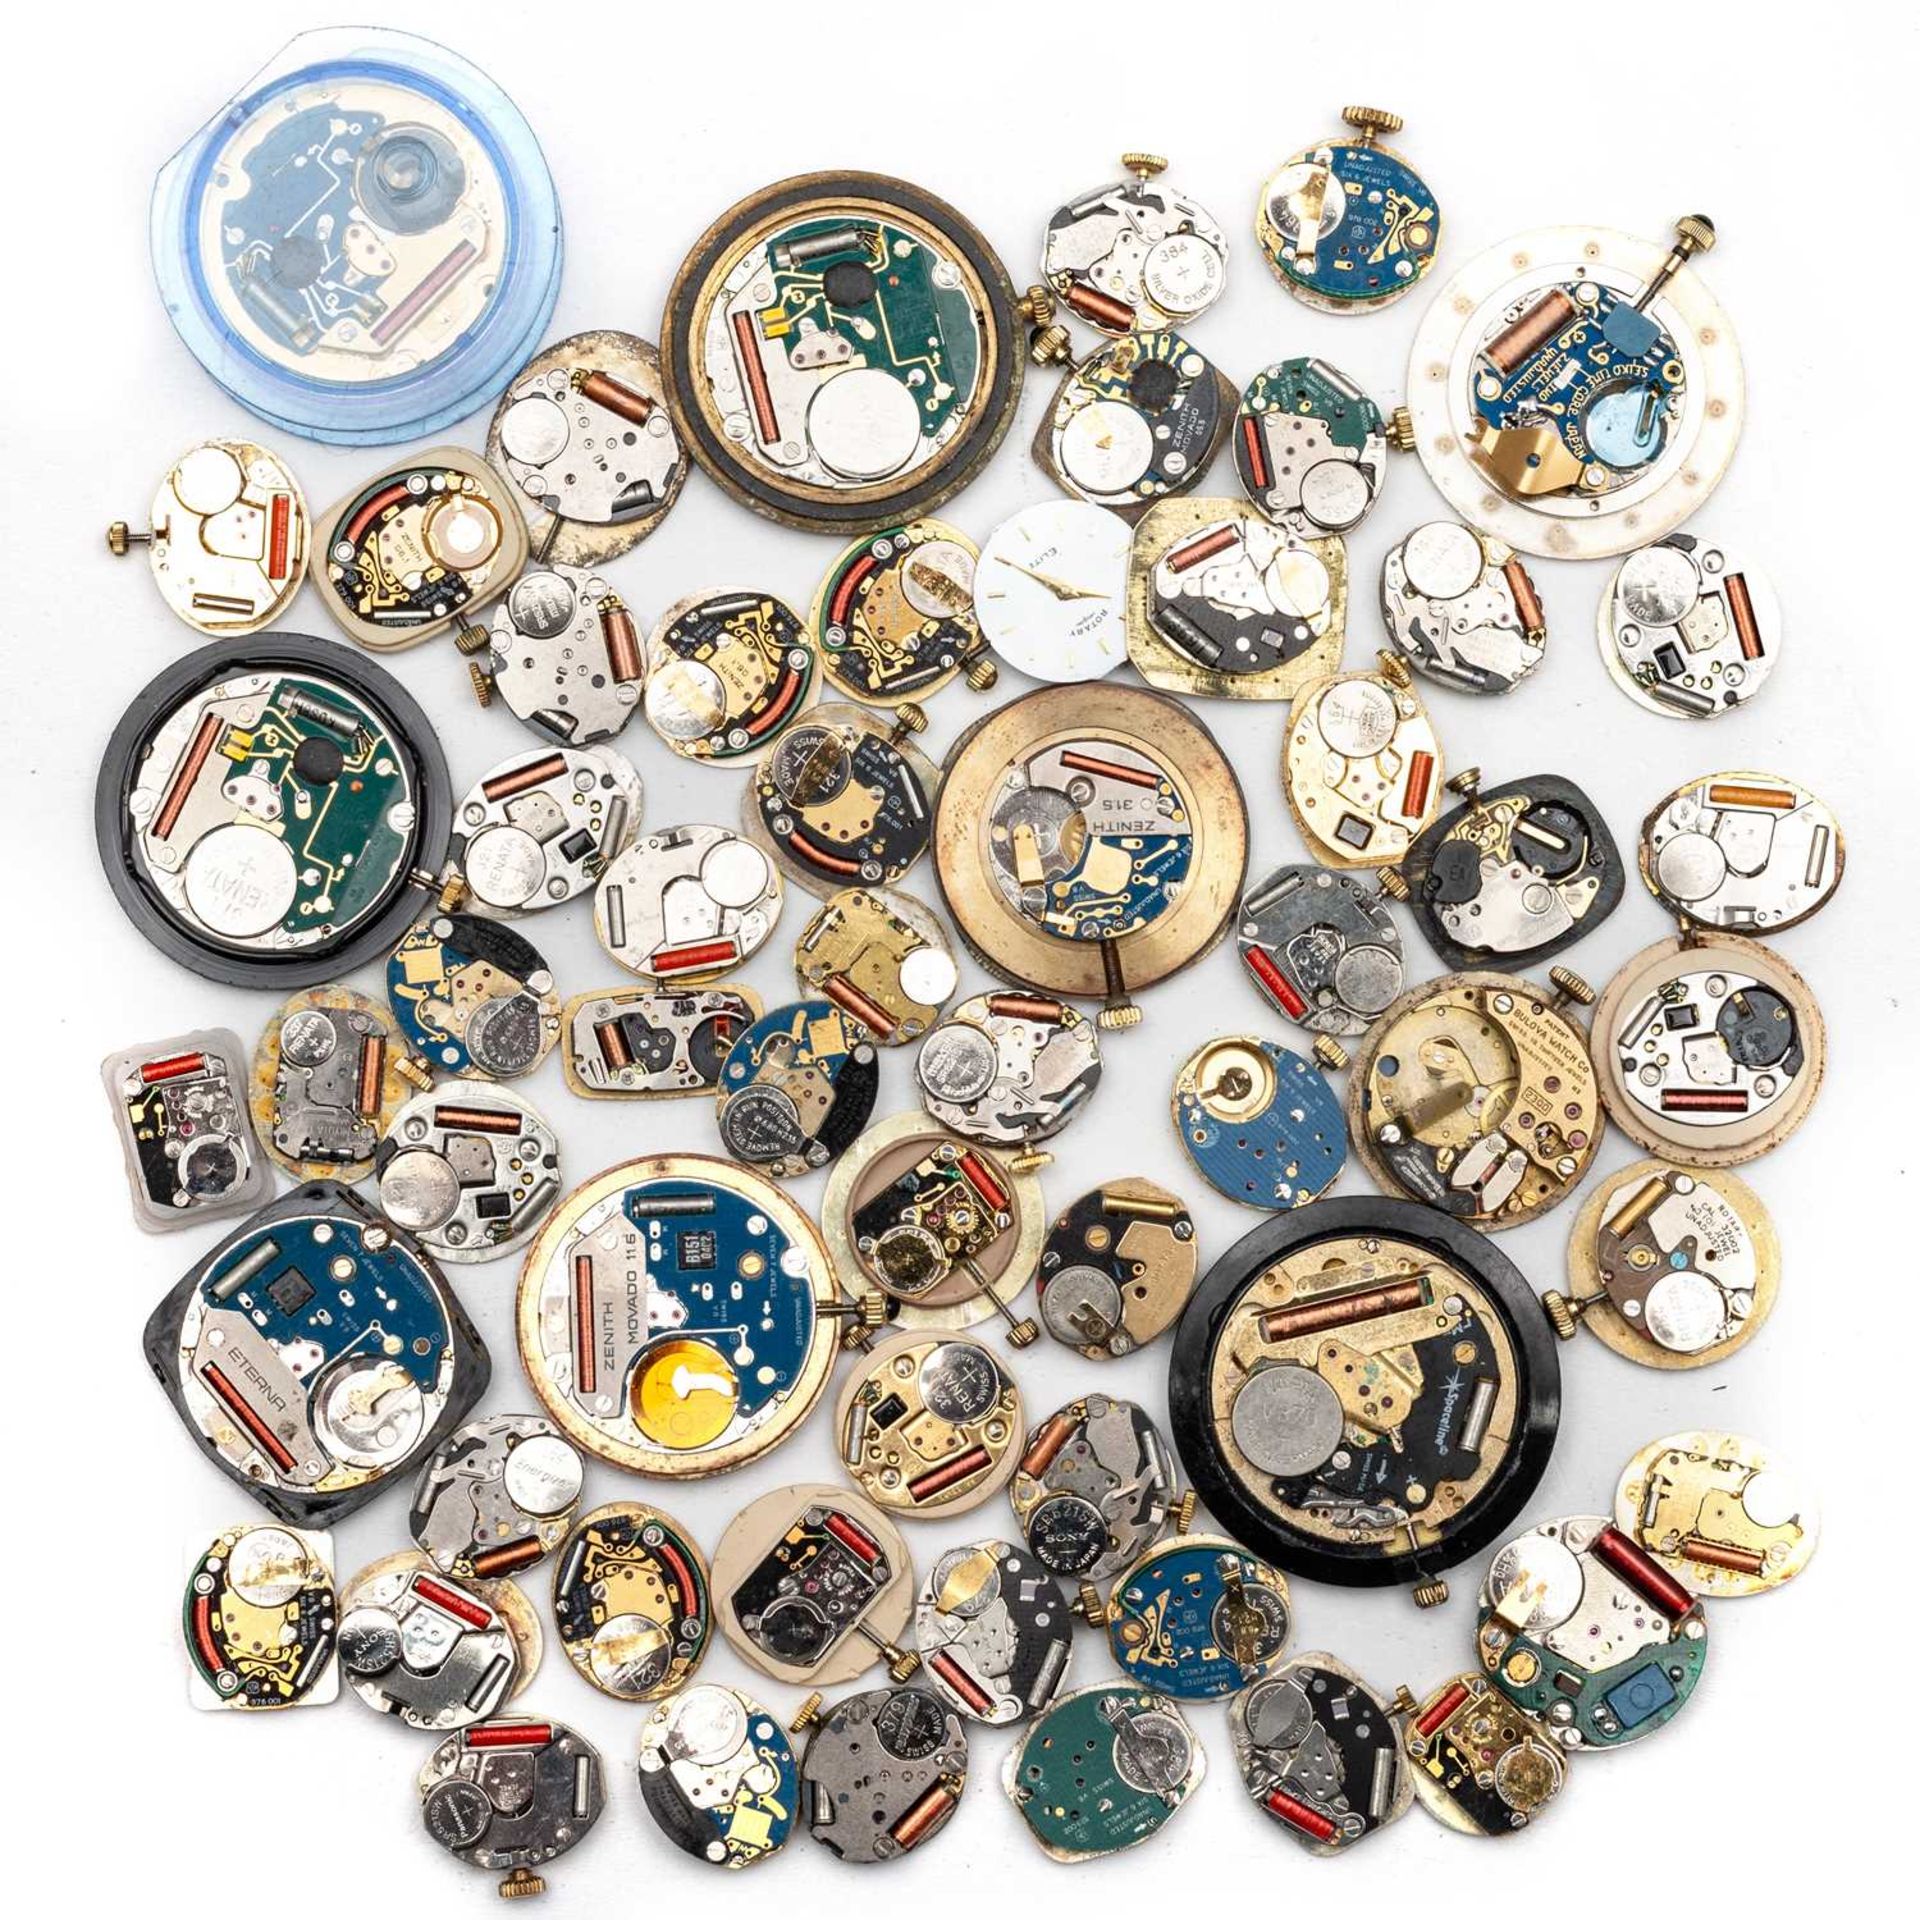 A MIXED GROUP OF QUARTZ WATCH MOVEMENTS - Image 4 of 4